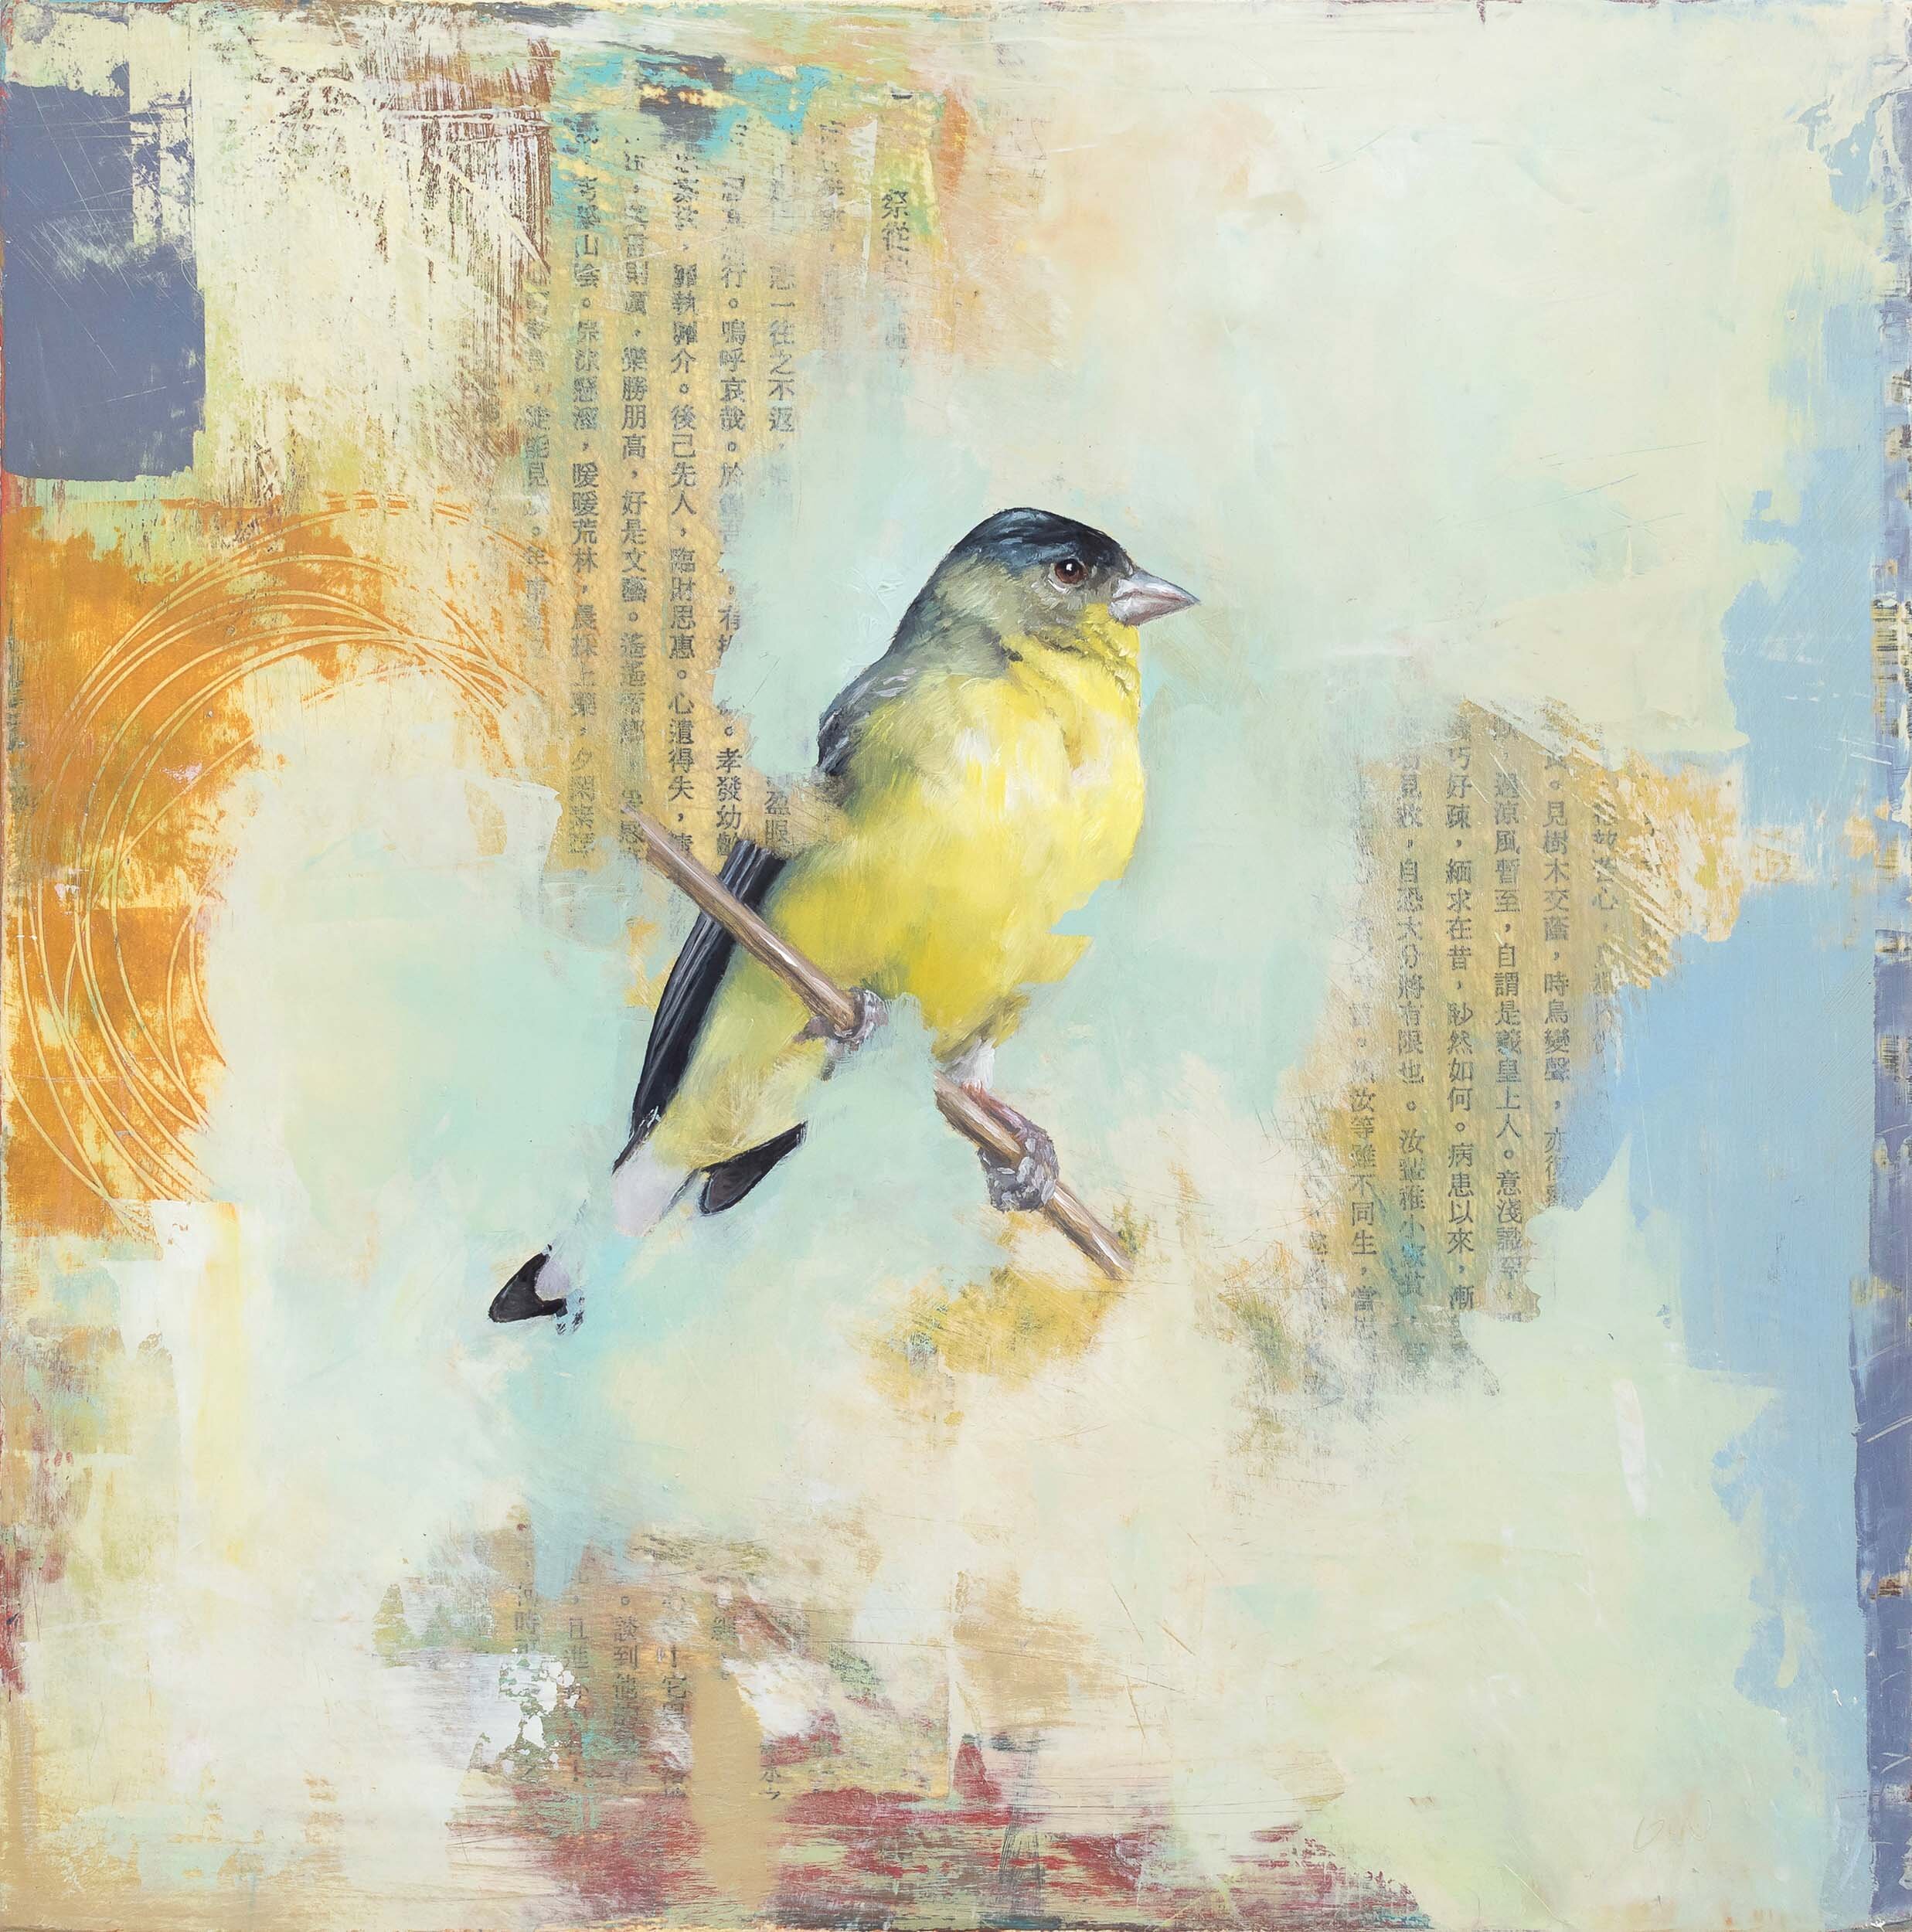   Goldfinch  2019 oil and collage on panel 10 x 10 inches  Private Collection 